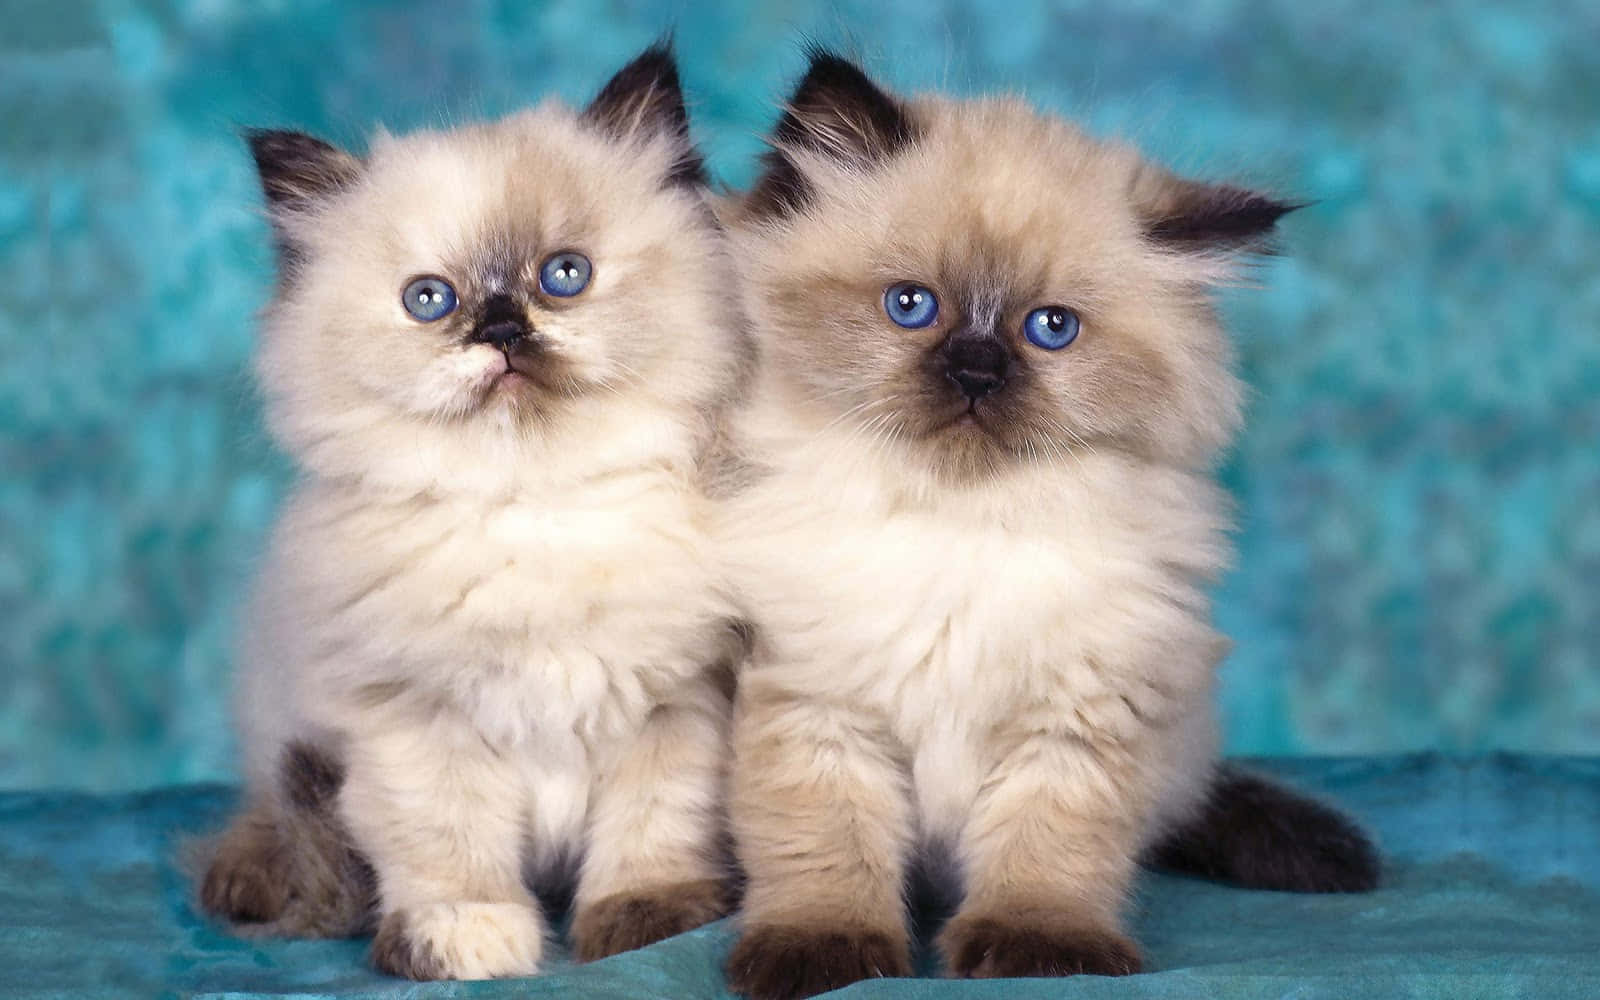 Who Can Resist The Allure Of These Playful Kittens?